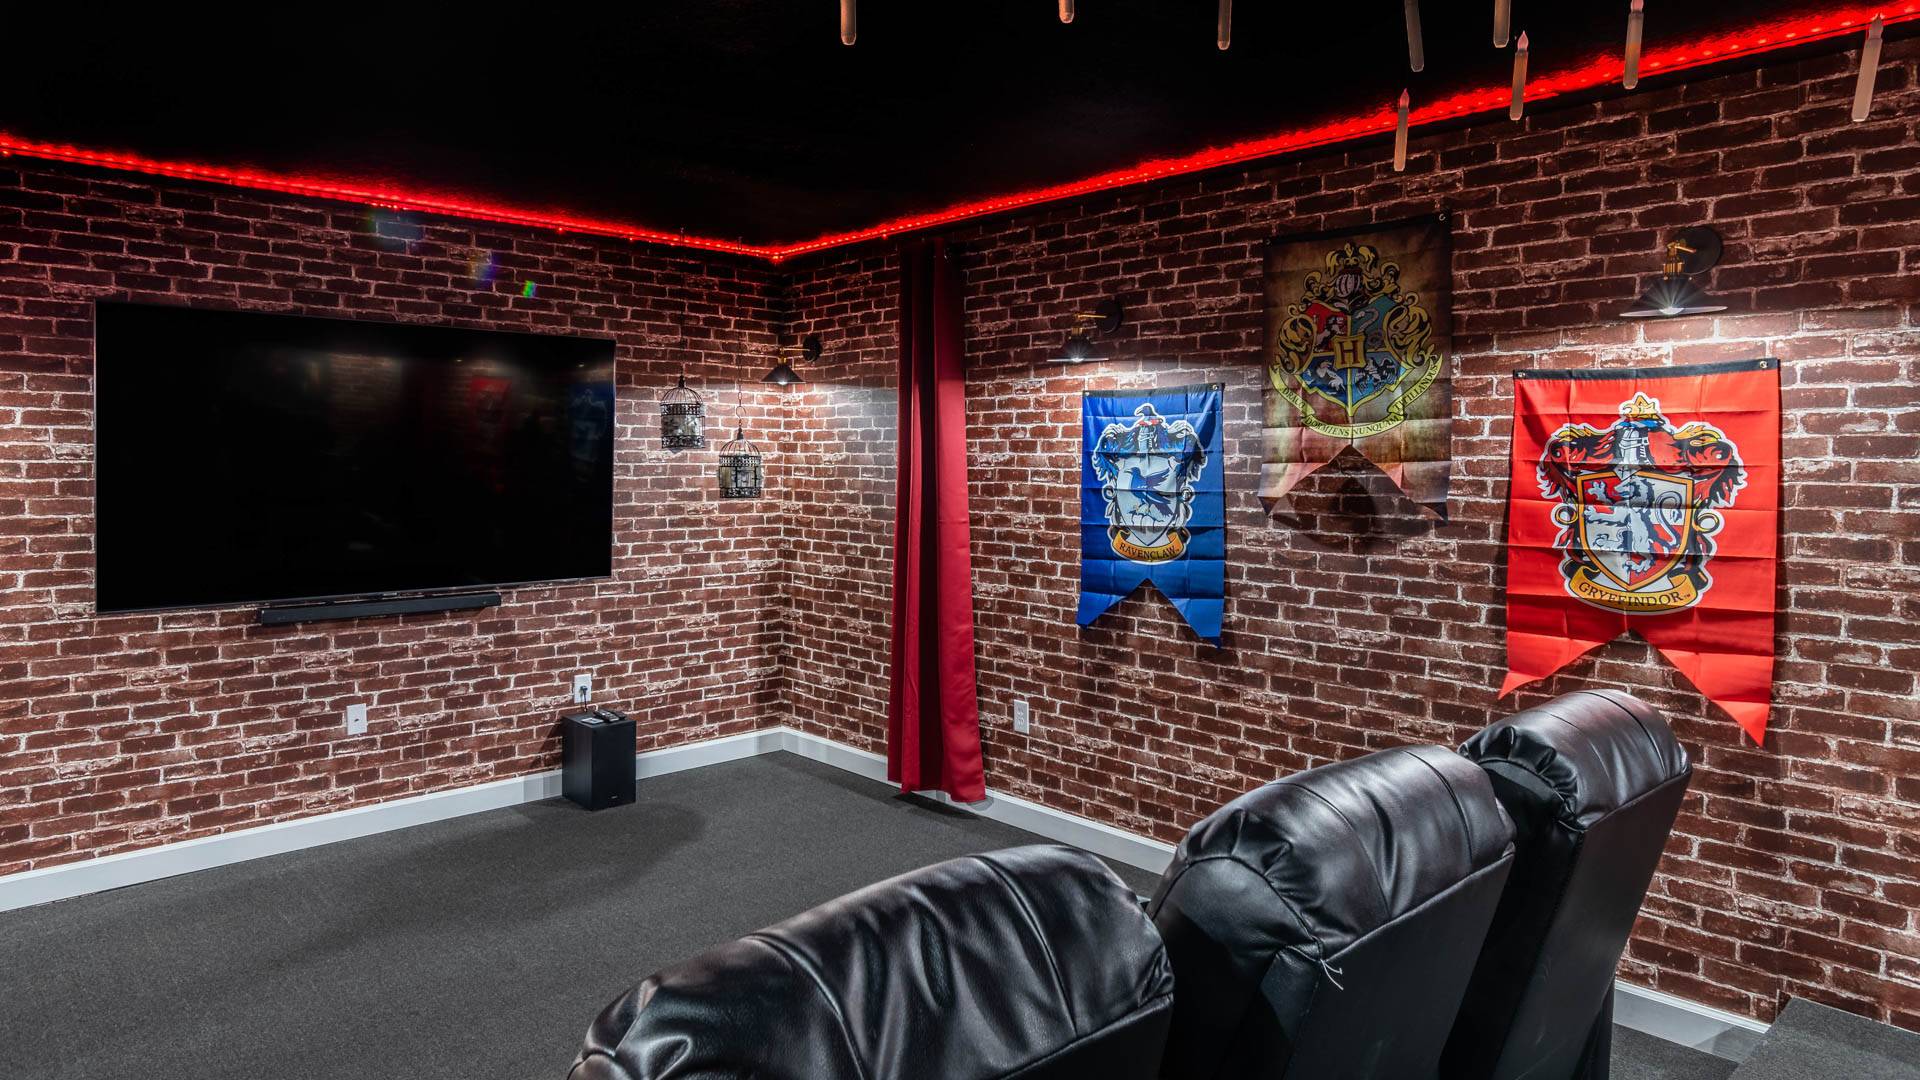 Theater Room (Angle)
83